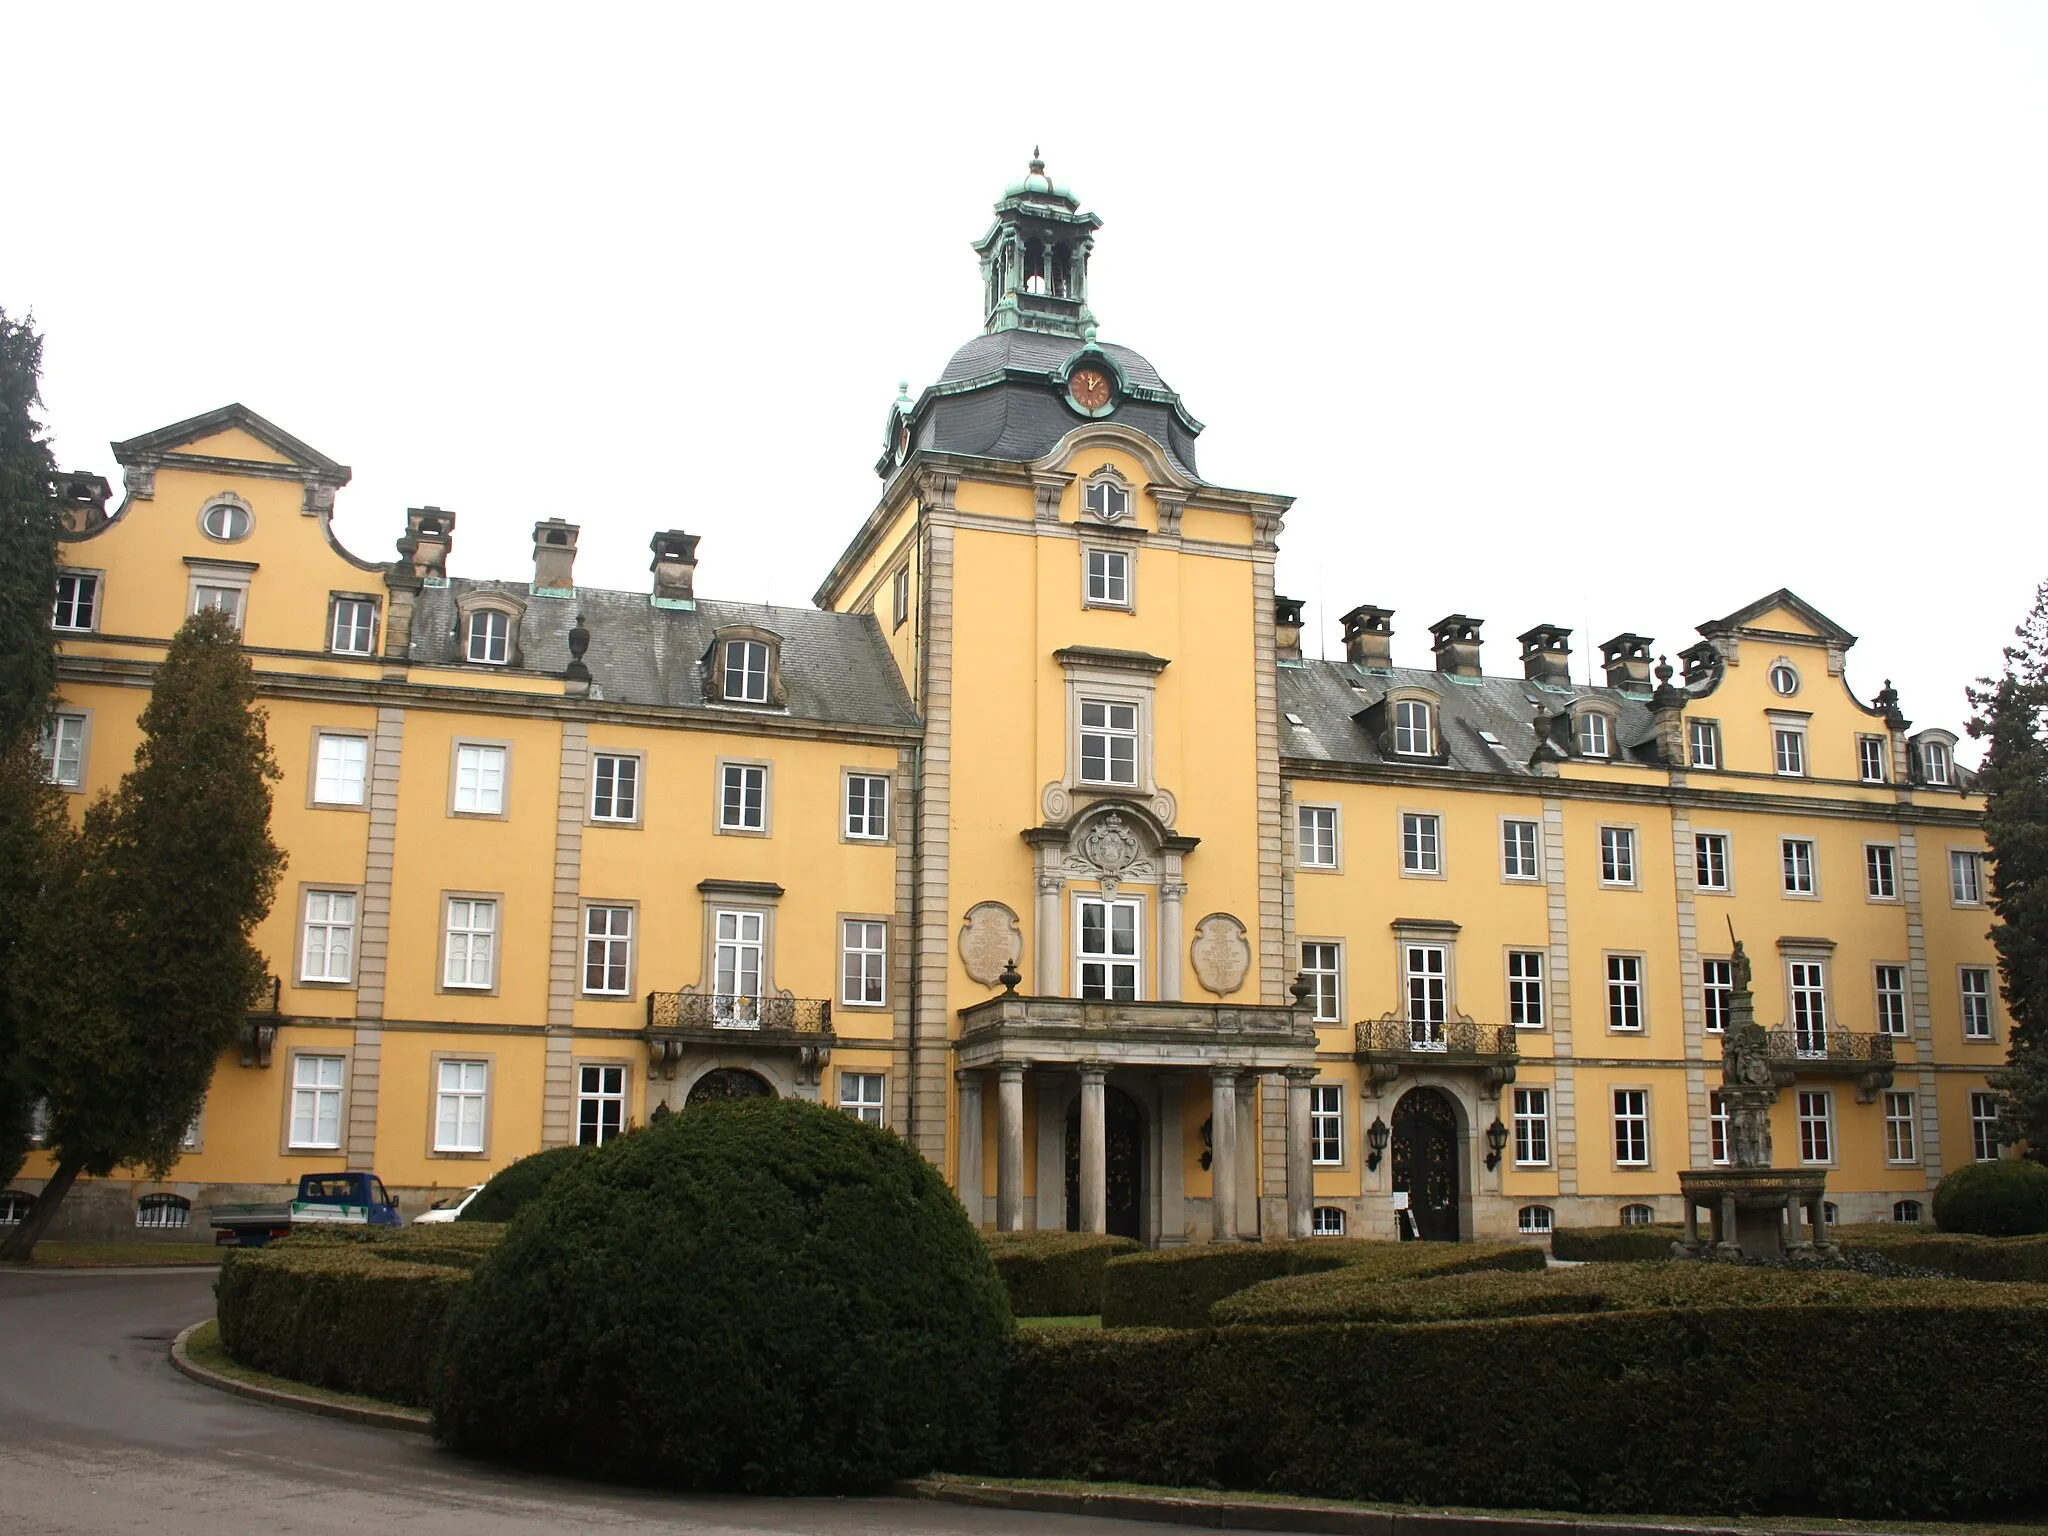 Photo showing: Castle in Bückeburg, Germany. Baroque fassade with main entrance.